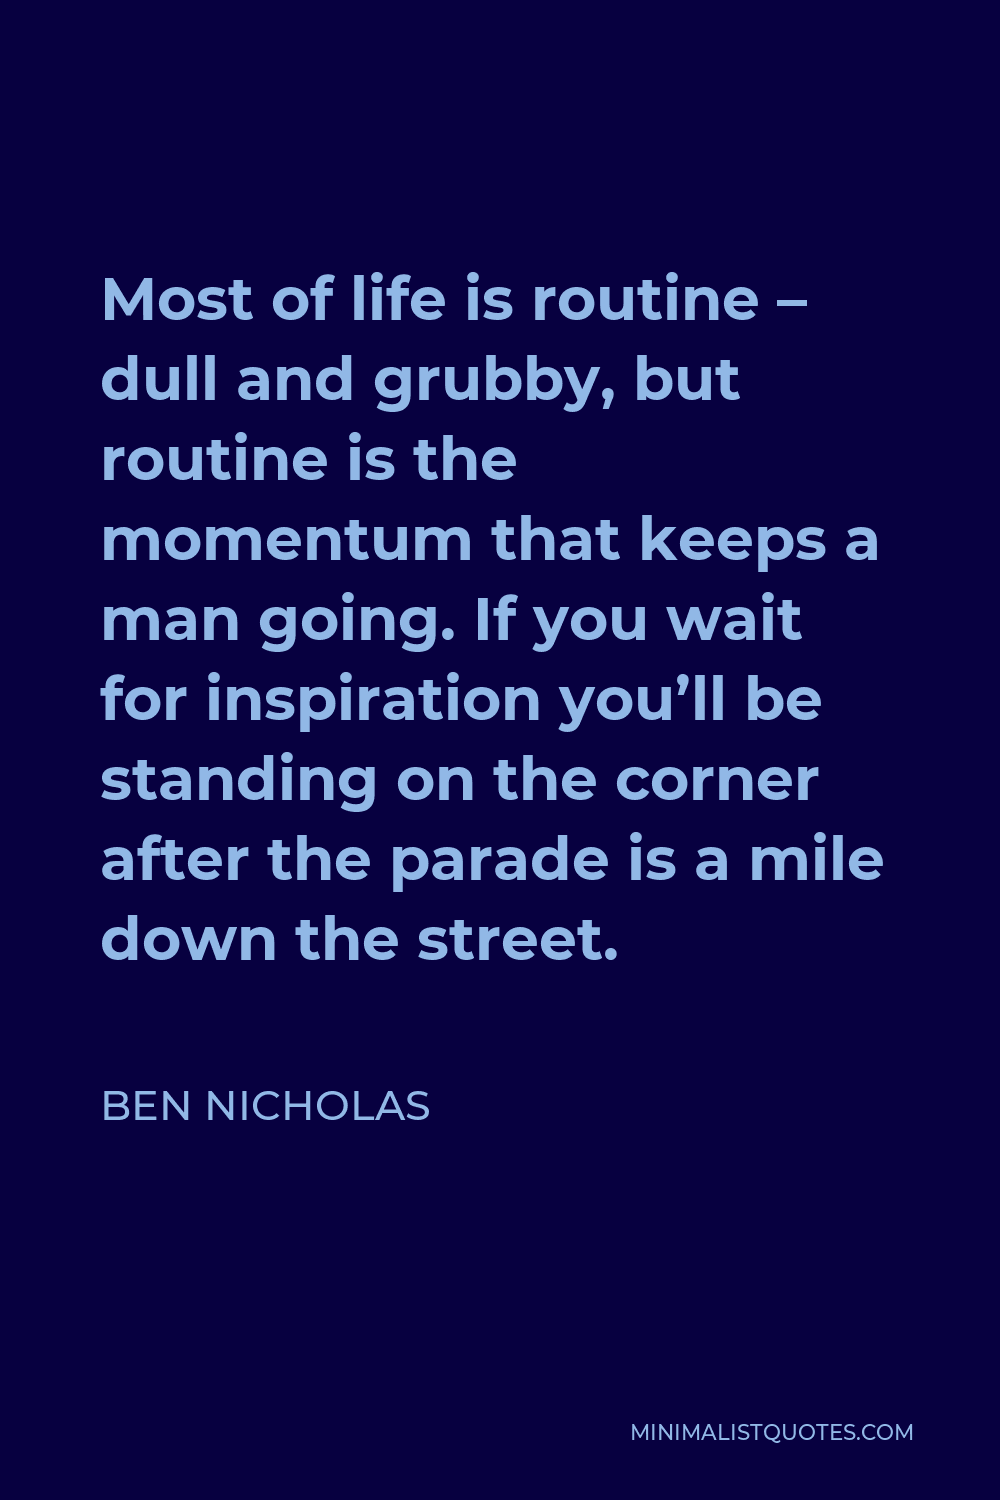 Ben Nicholas Quote - Most of life is routine – dull and grubby, but routine is the momentum that keeps a man going. If you wait for inspiration you’ll be standing on the corner after the parade is a mile down the street.